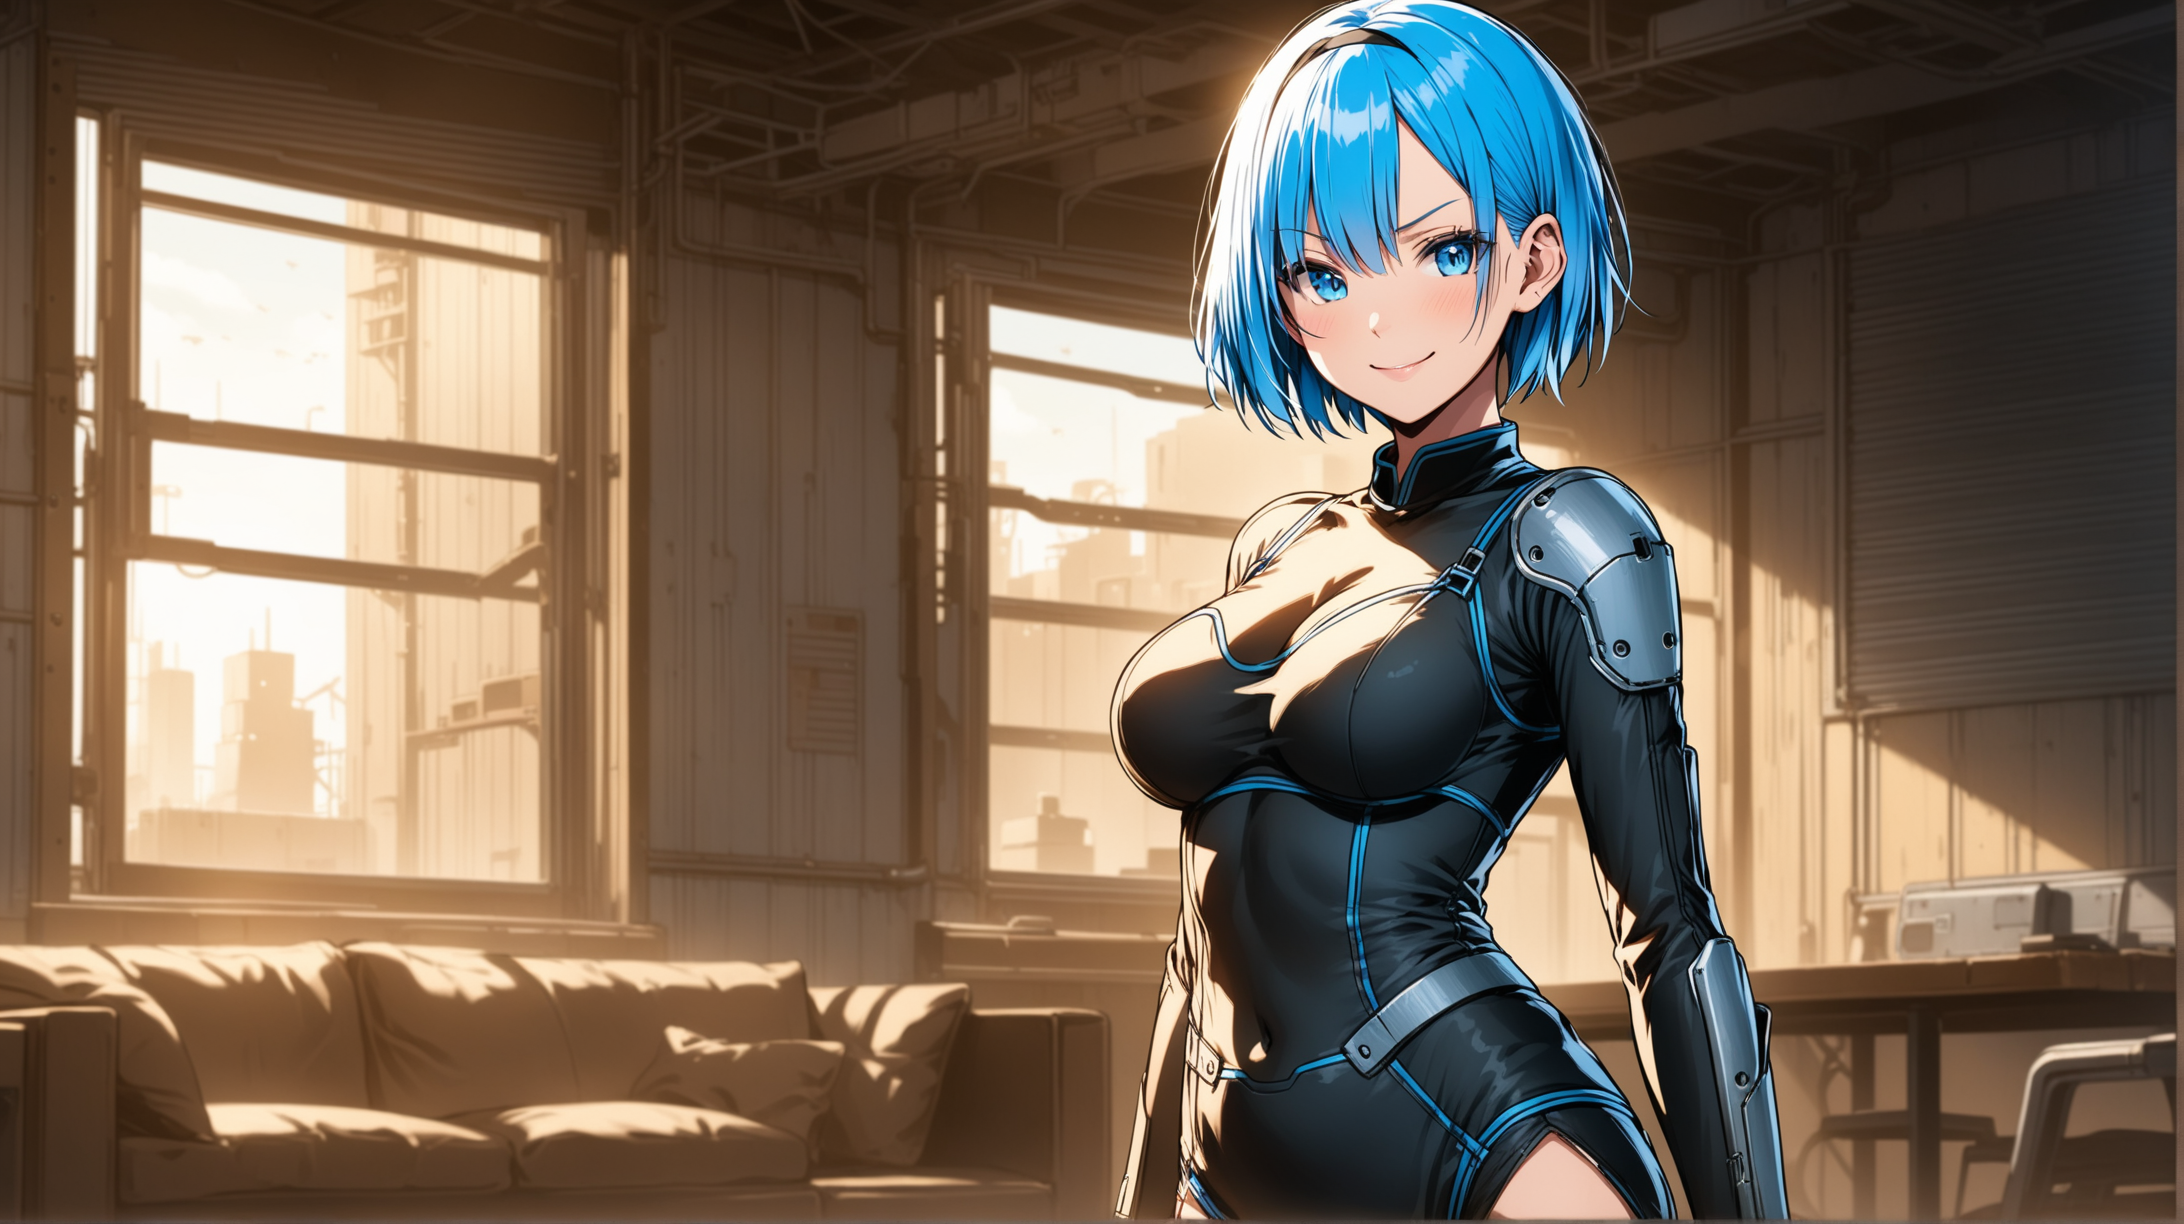 Confident Rem from Fallout Series Smiling Indoors